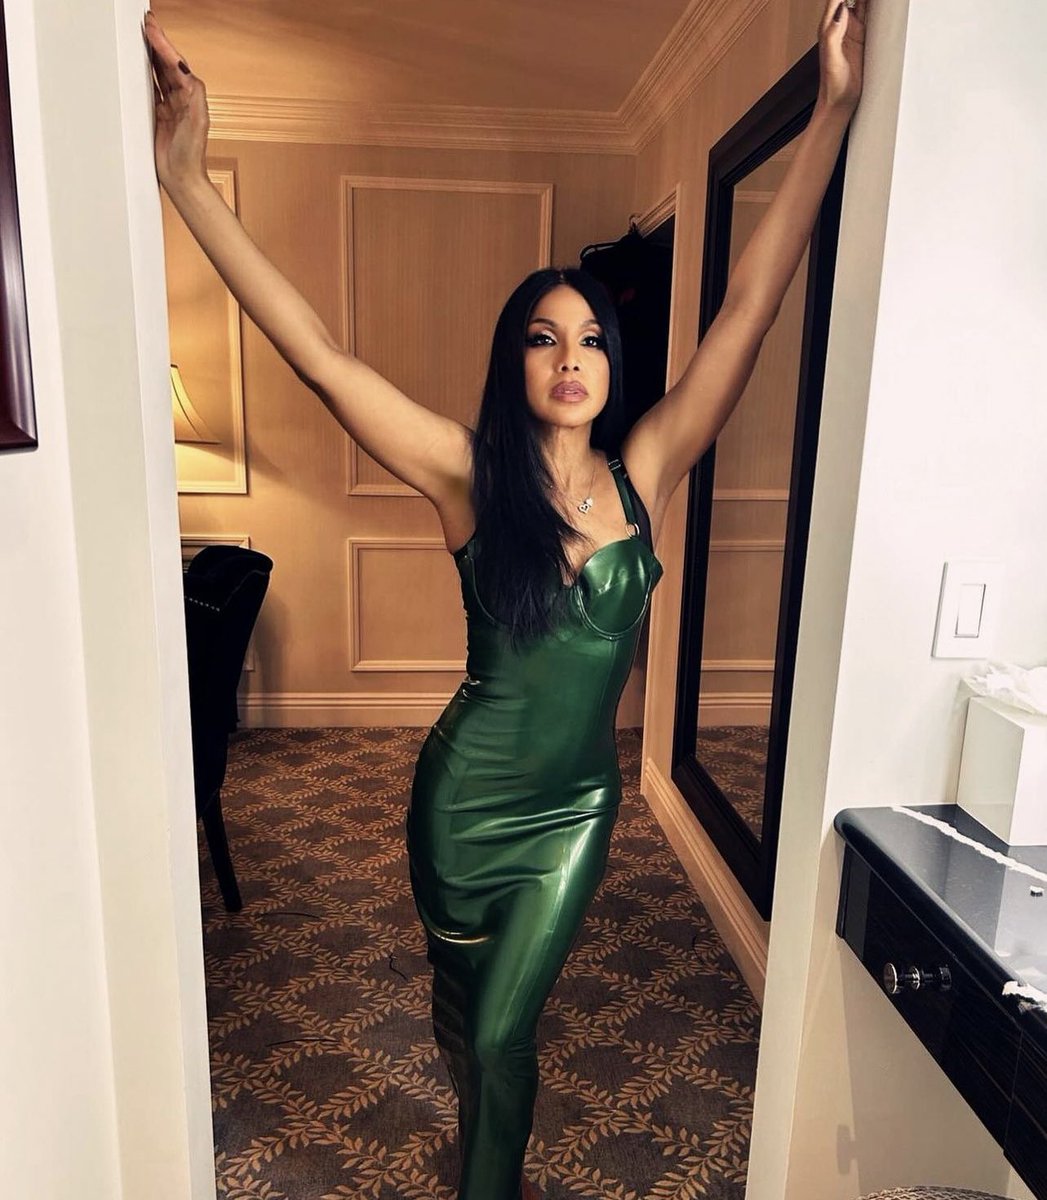 Toni Braxton #LIVINGLEGEND with her at this point ICONIC/SIGNATURE Doorway pose is Servin!!!! Giving me Emerald City tease!!!!! Yup TB finna give MORE than what you asked for during this Vegas residency!!!! 😏😜💚✨ #LOVEANDLAUGHTER 
(Lol the Wizard of Oz on my mind😂😂😂😅)